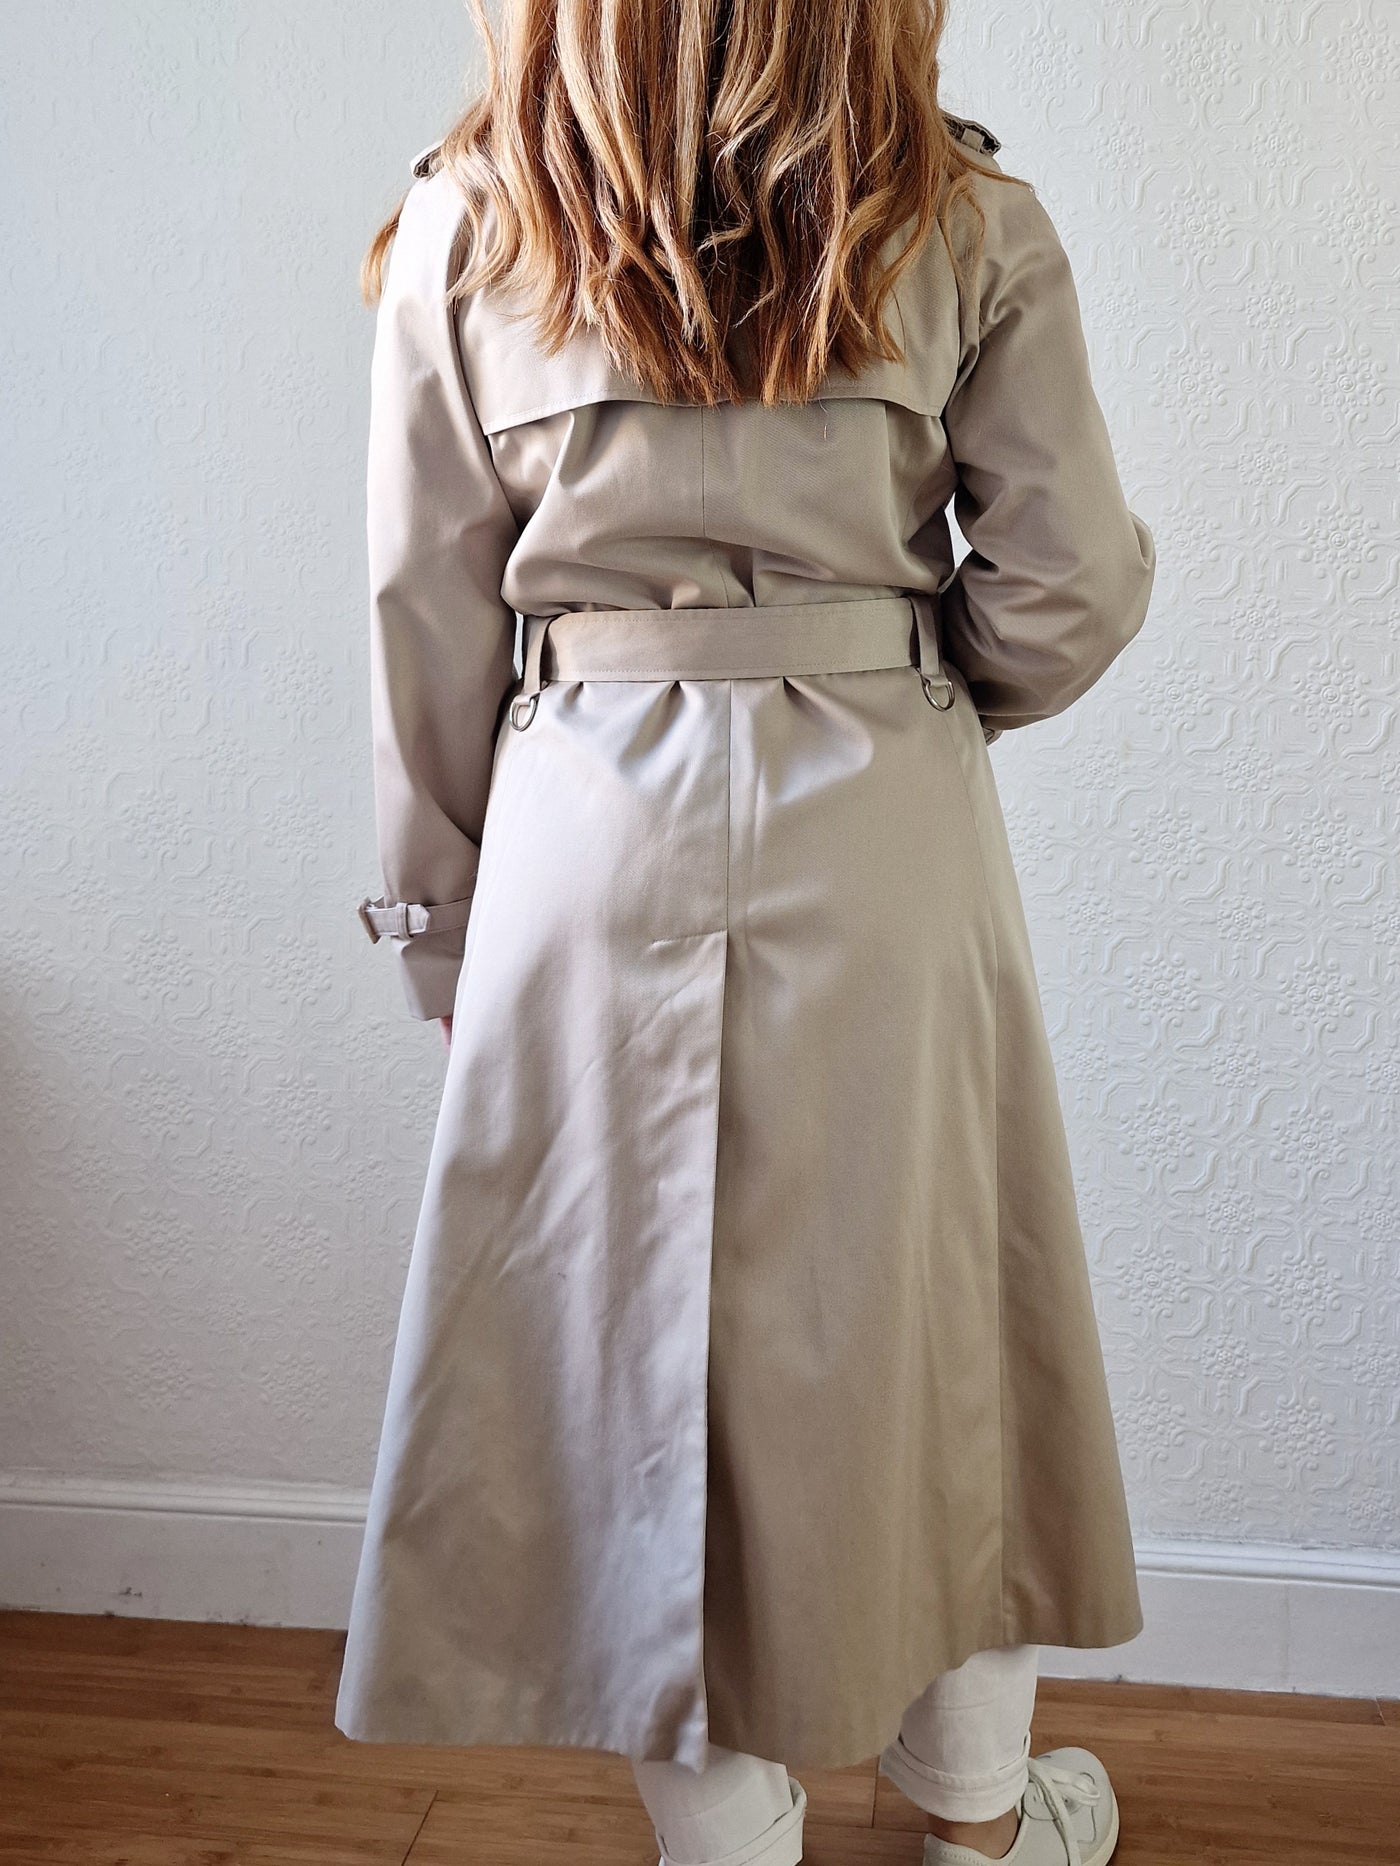 Vintage Light Beige Double Breasted Trench Coat with Belt - S